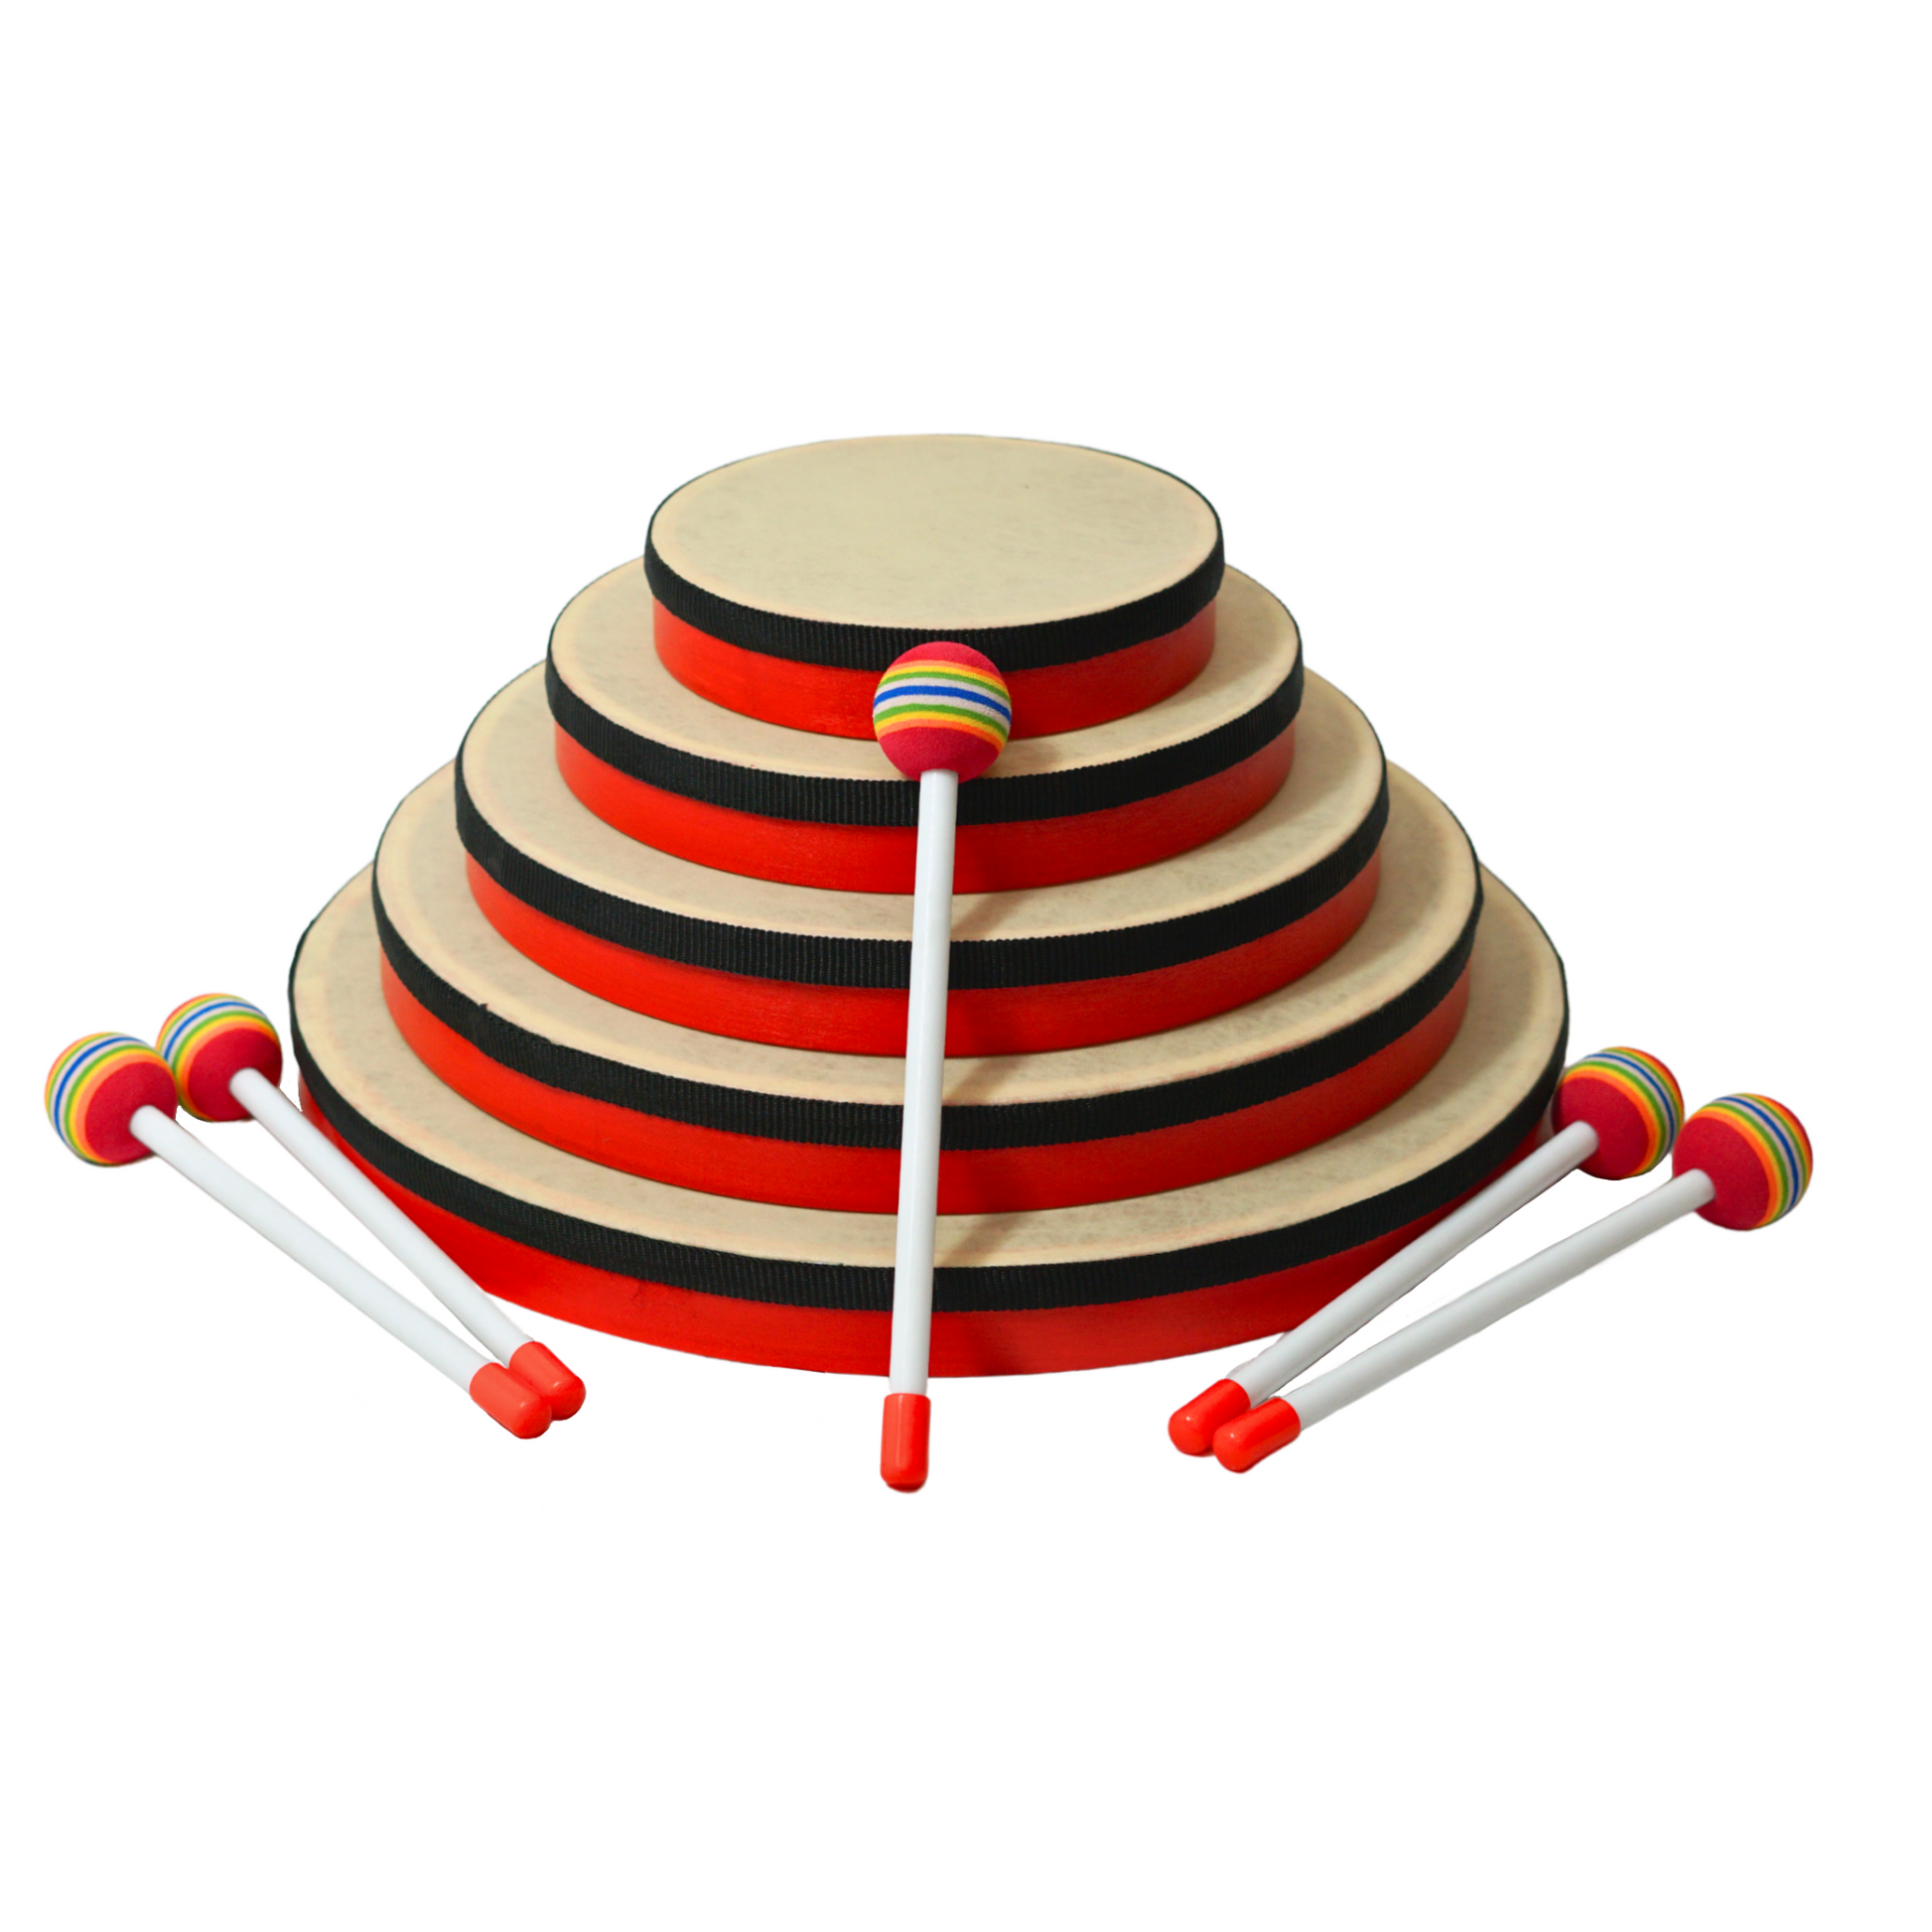 Hand Drum with Mallet 5 Sizes